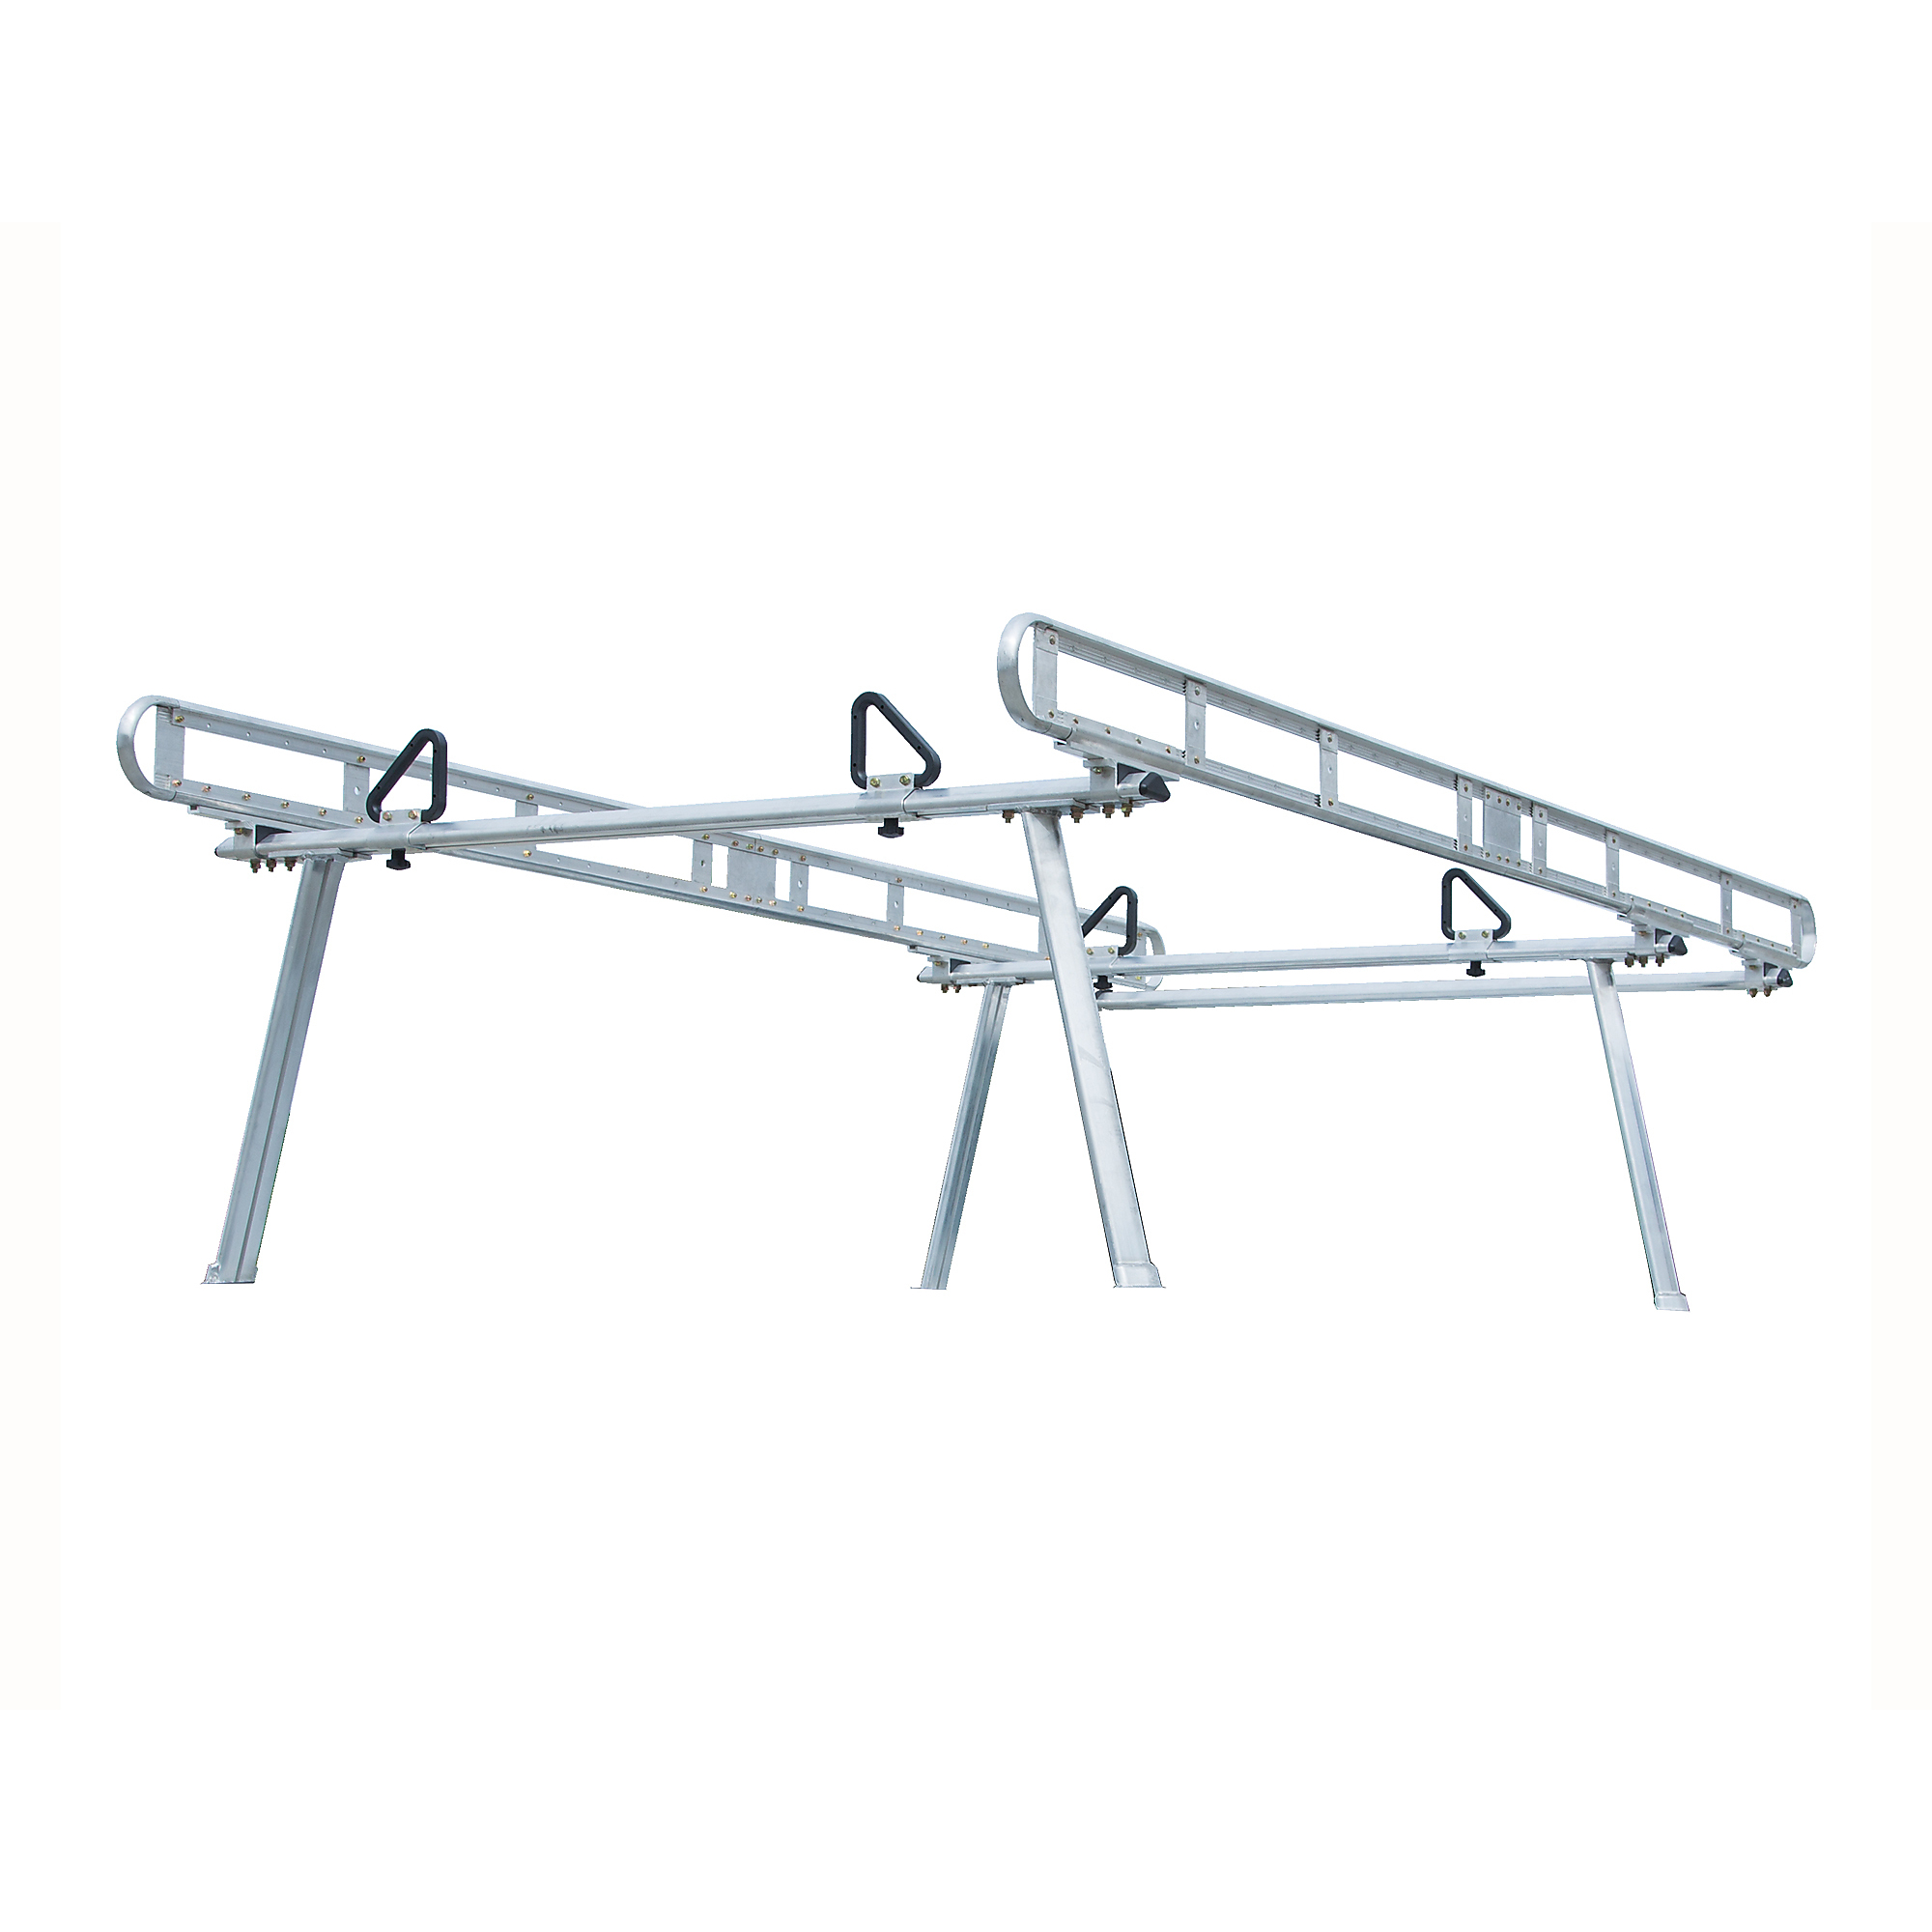 Buyers Products, Clear Anodized Aluminum Truck Ladder Rack, Shelves (qty.) 0 Material Aluminum, Model 1501400